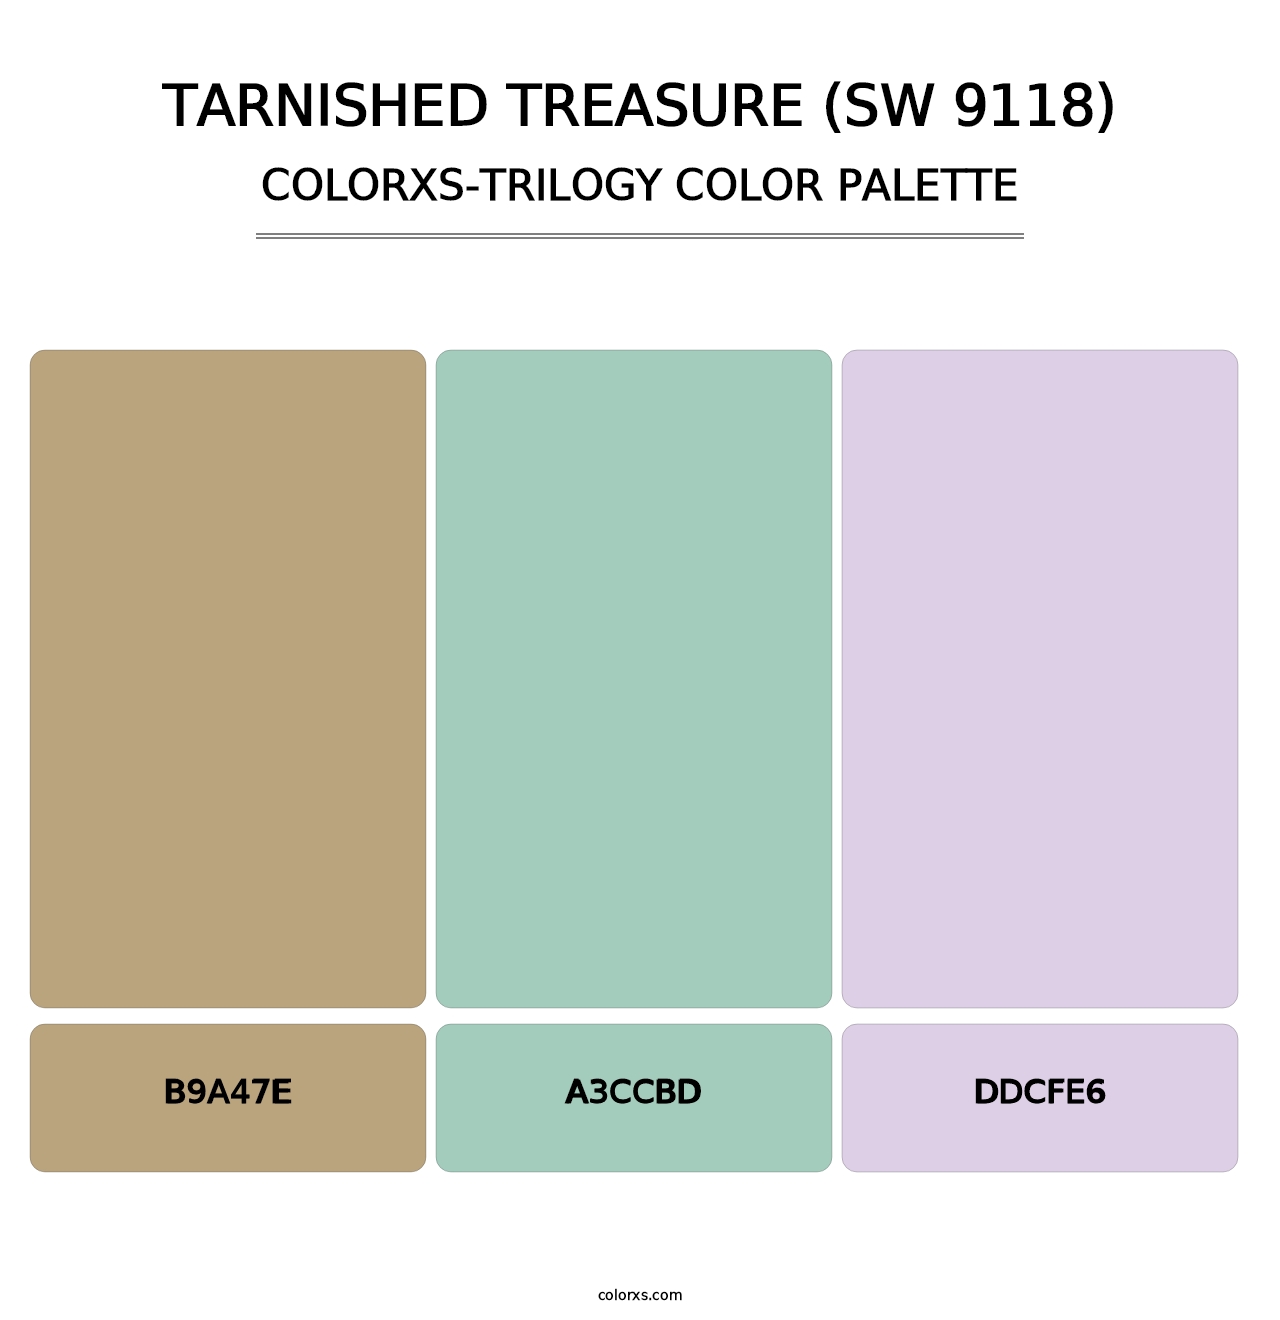 Tarnished Treasure (SW 9118) - Colorxs Trilogy Palette